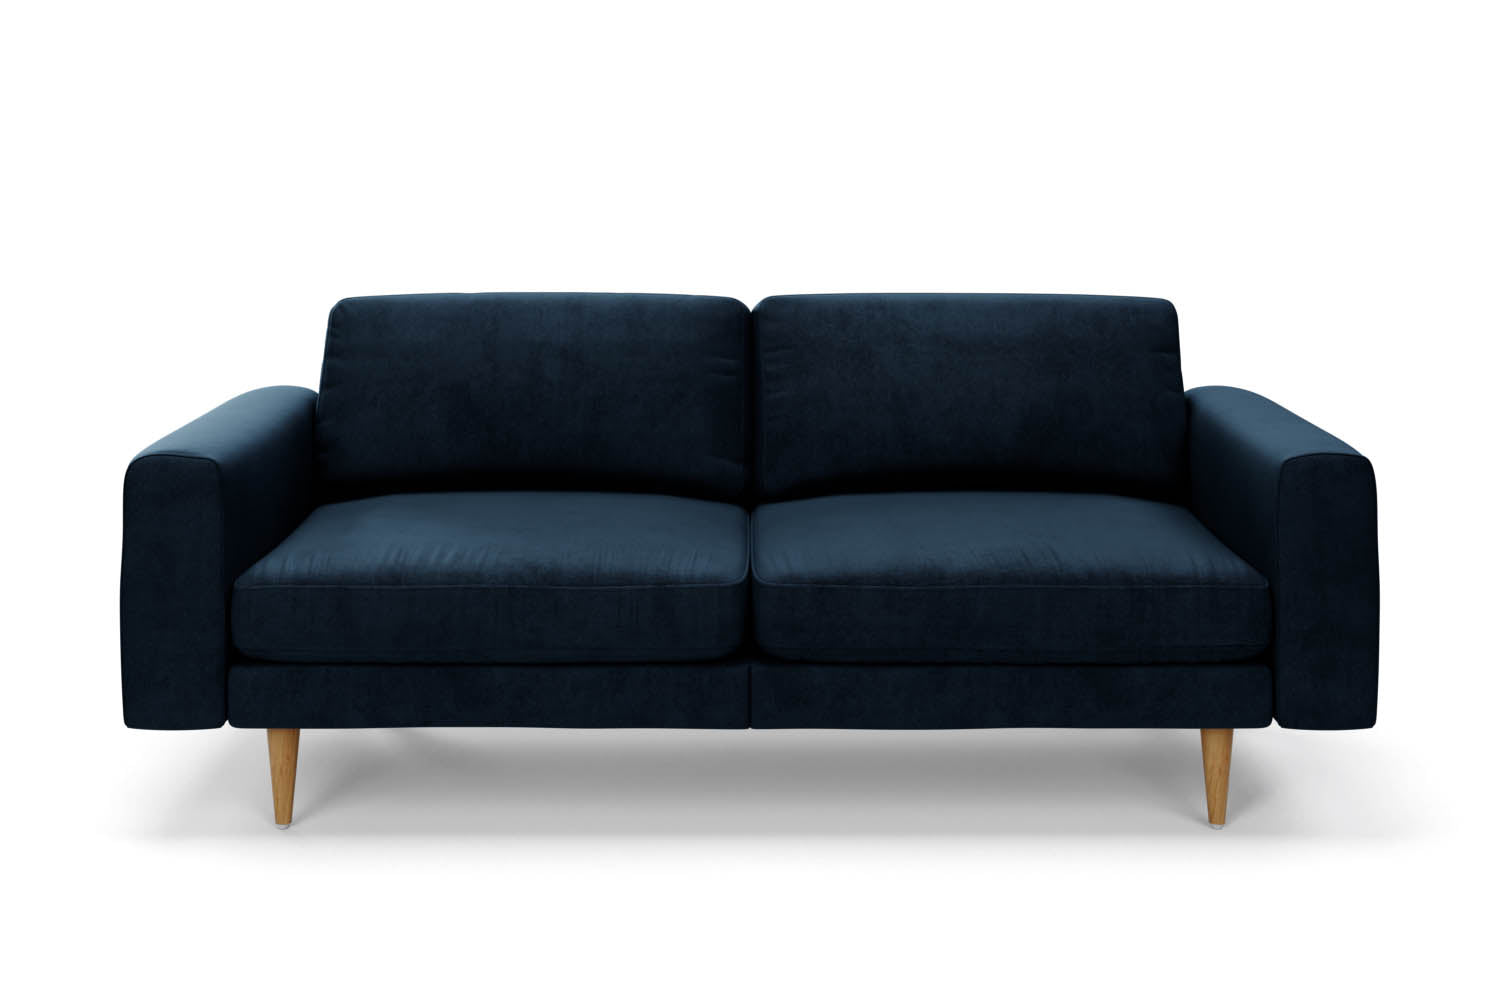 SNUG | The Big Chill 3 Seater Sofa in Deep Blue variant_40837174493232